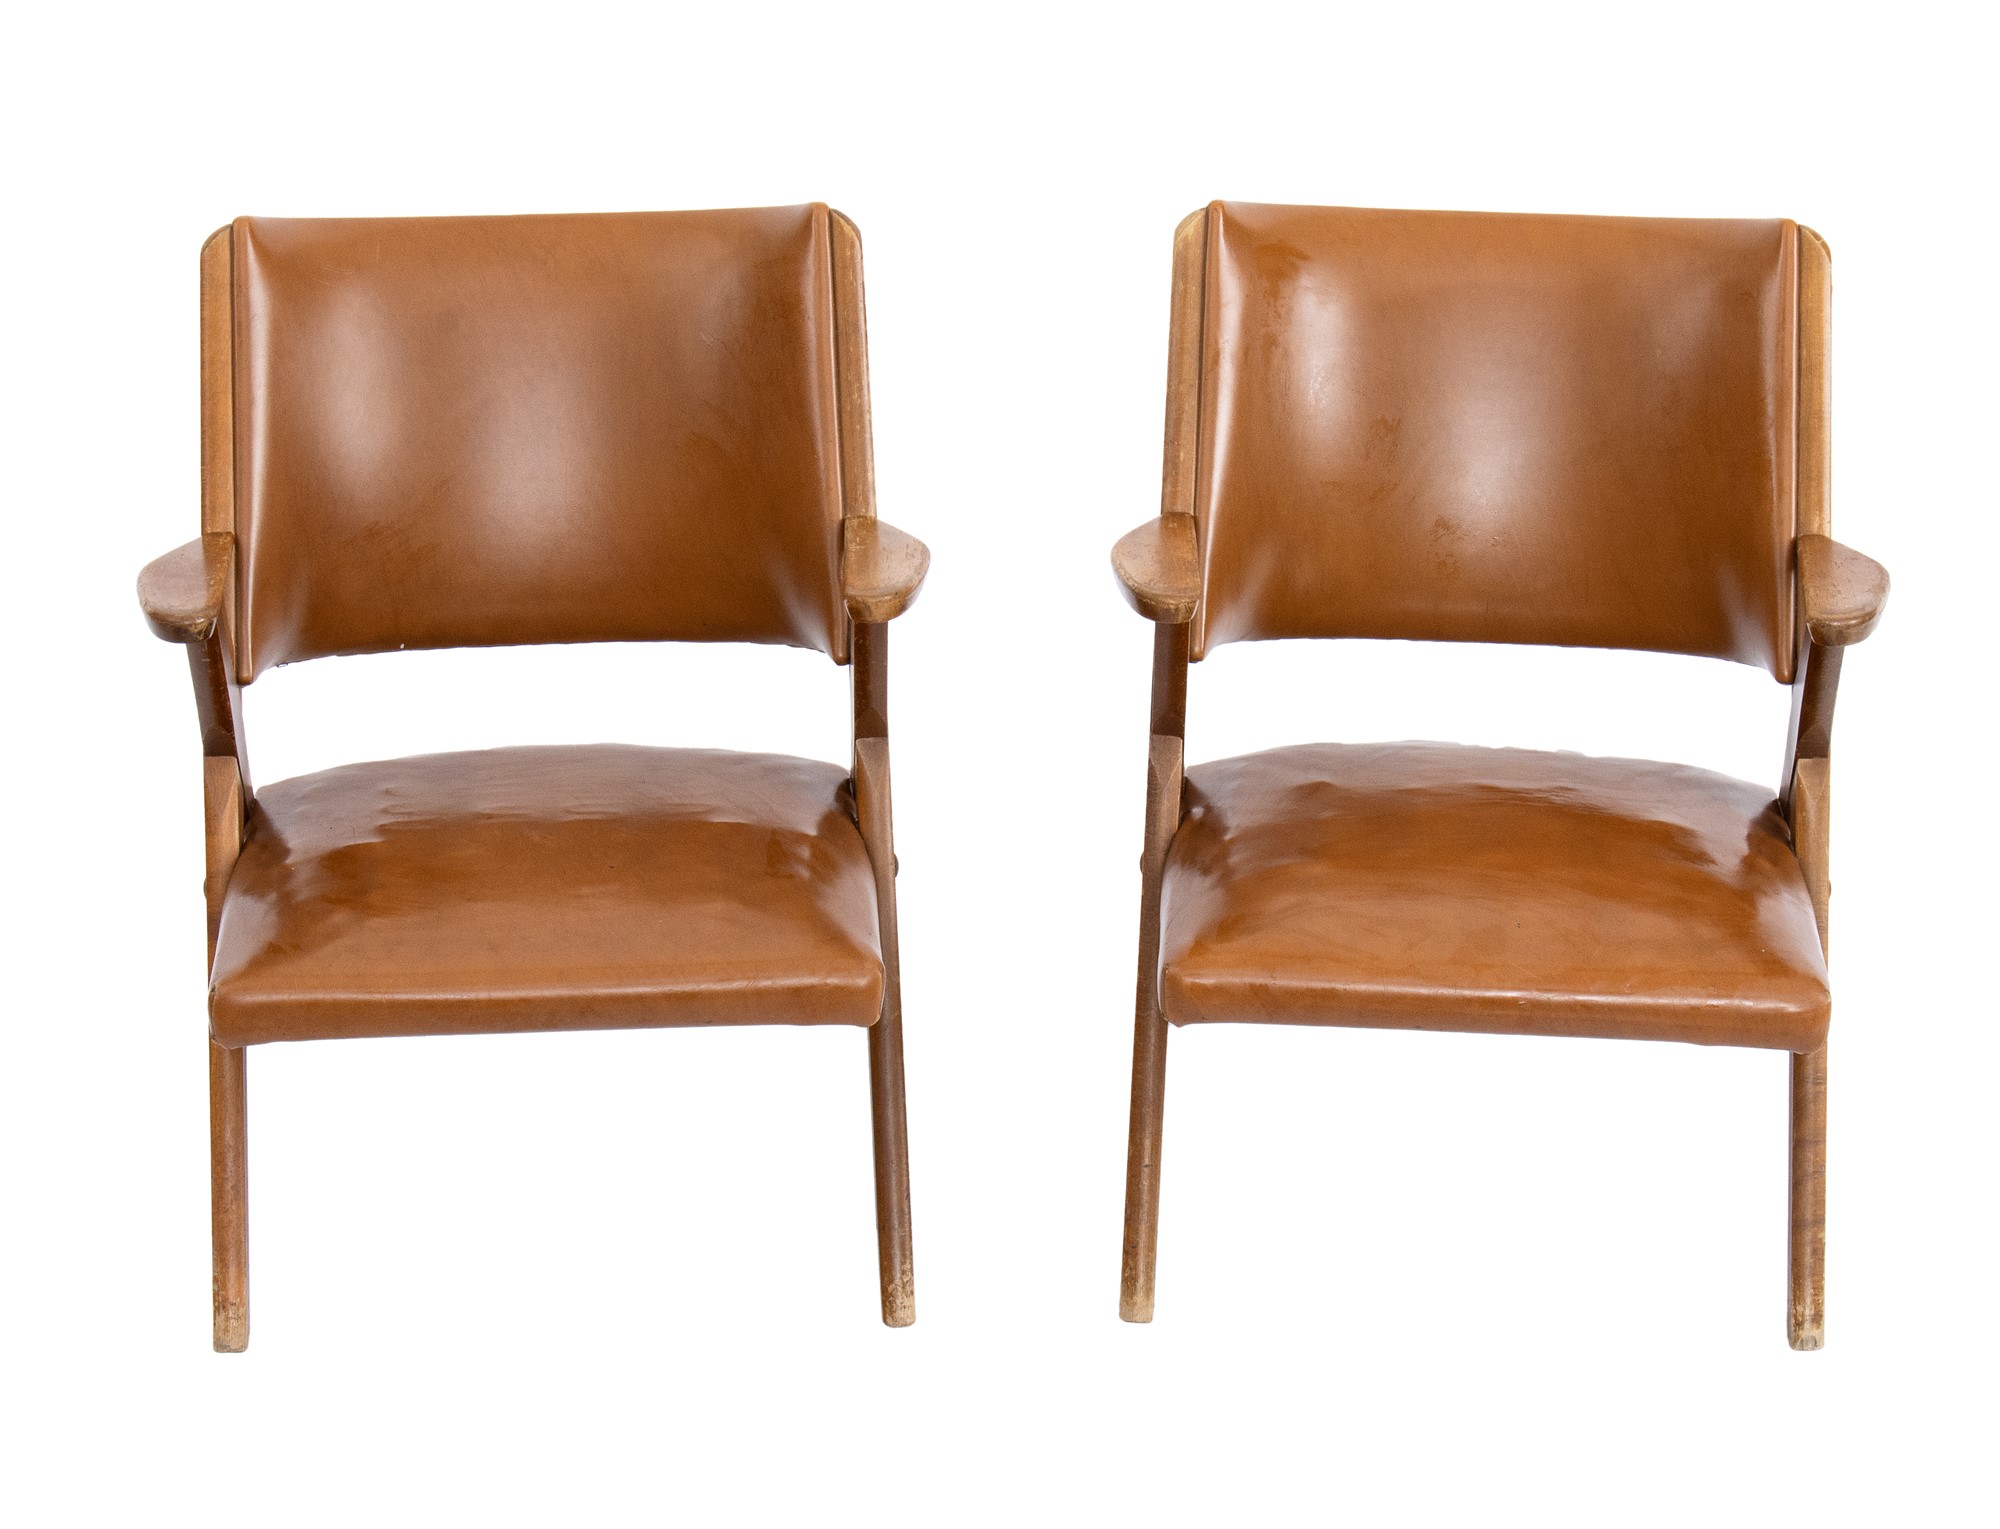 Dal Vera pair of armchairs with upholstered leather seats and backs - Image 6 of 17